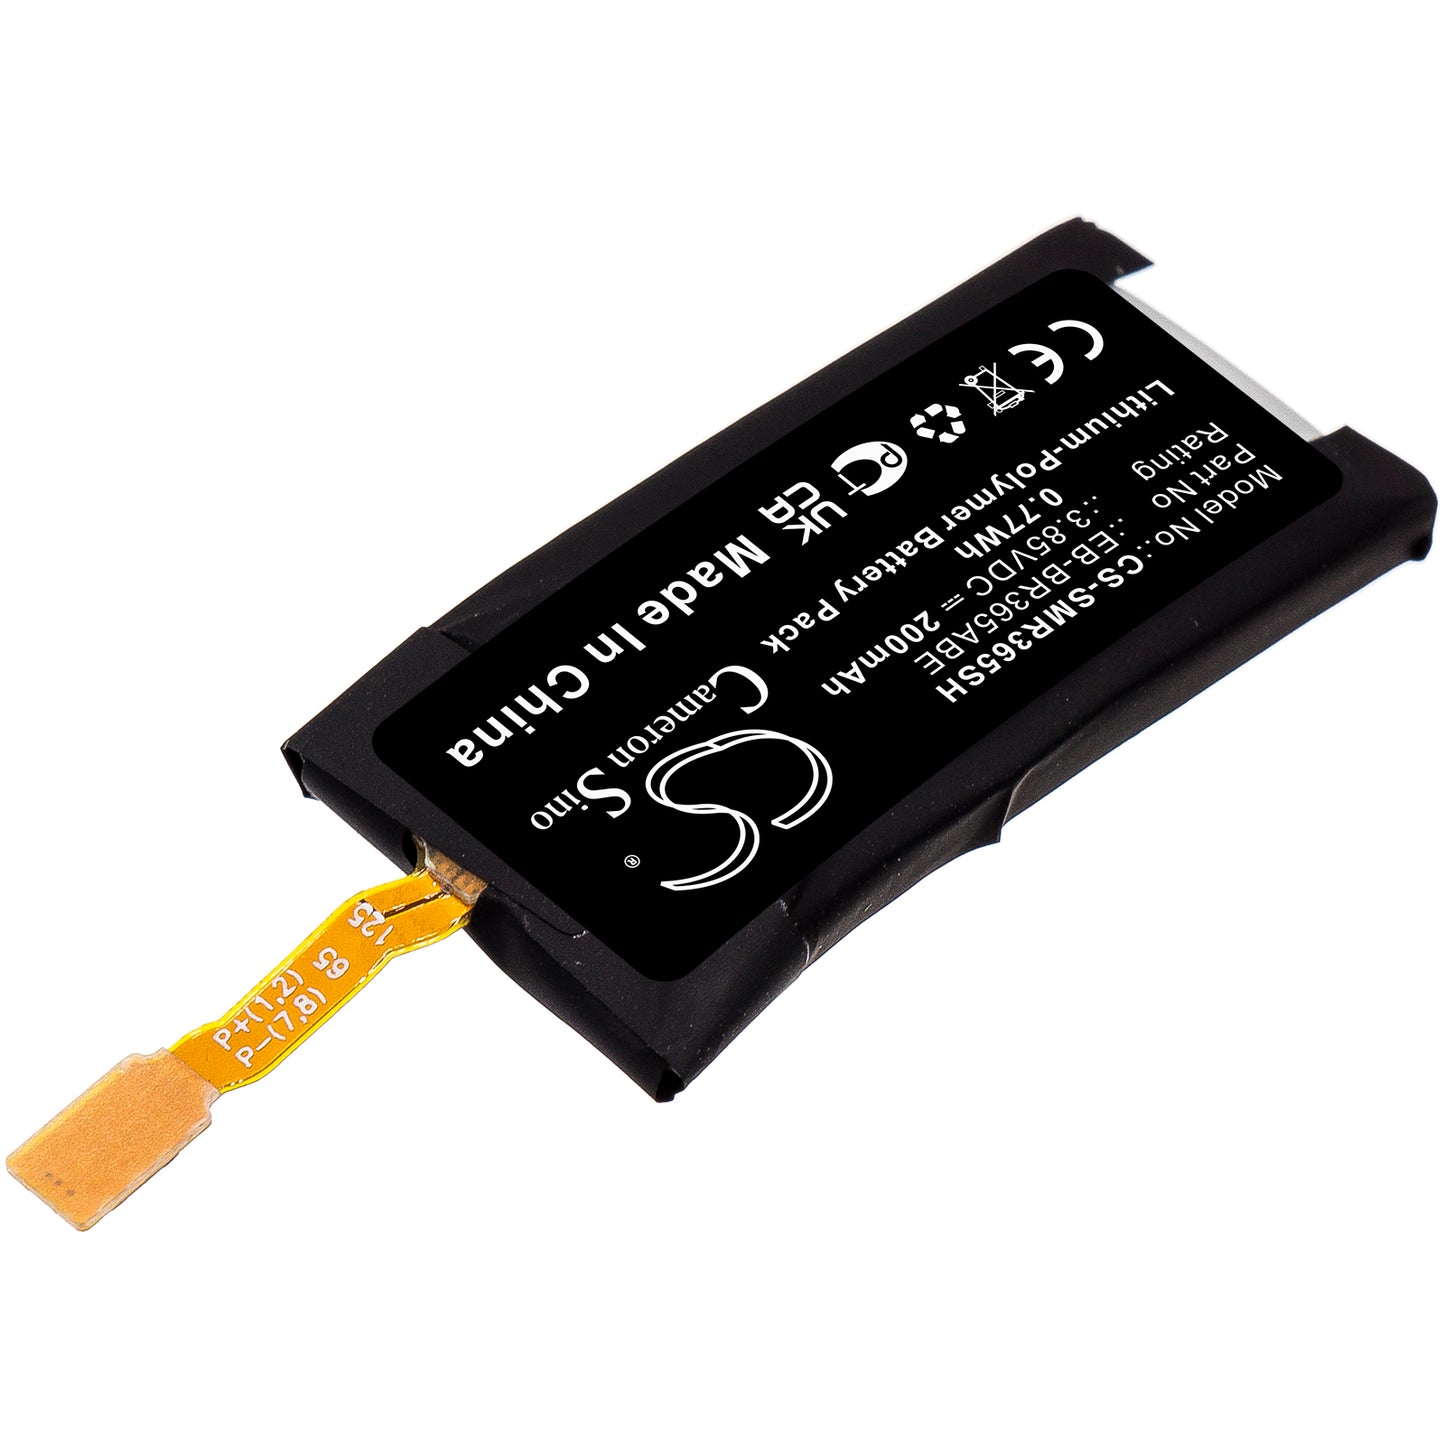 200mAh EB-BR365ABE, GH43-04770A Battery for Samsung Gear Fit 2 Pro SM-R365-SMAVtronics